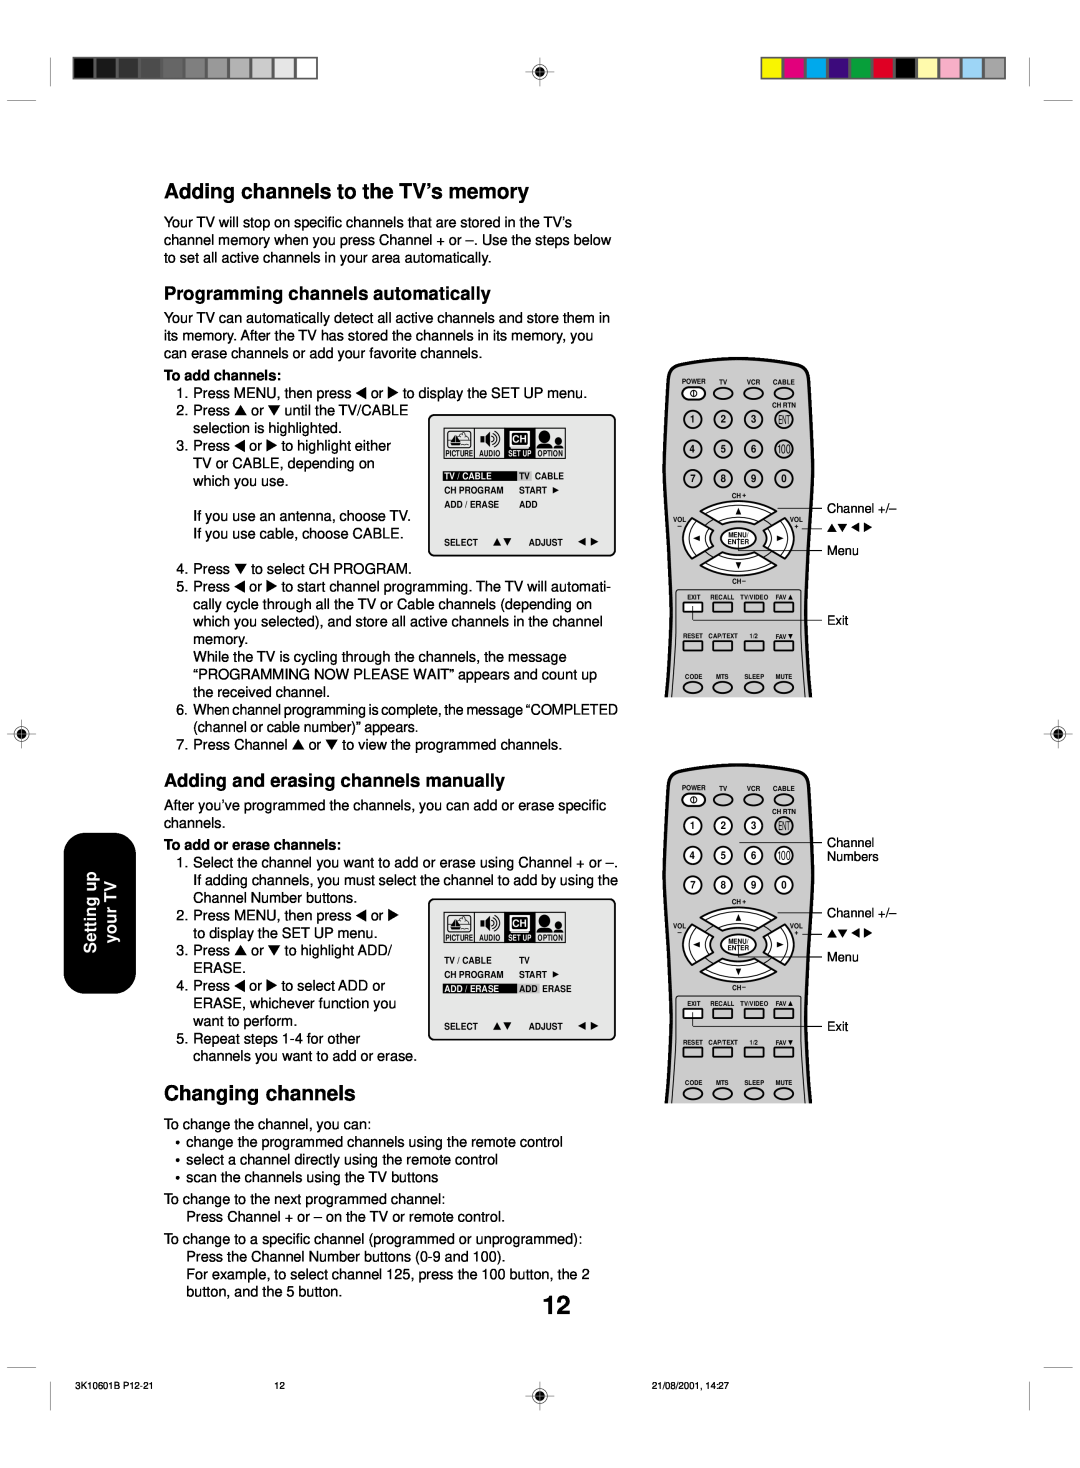 Toshiba 27A41 Adding channels to the TV’s memory, Changing channels, Programming channels automatically, To add channels 